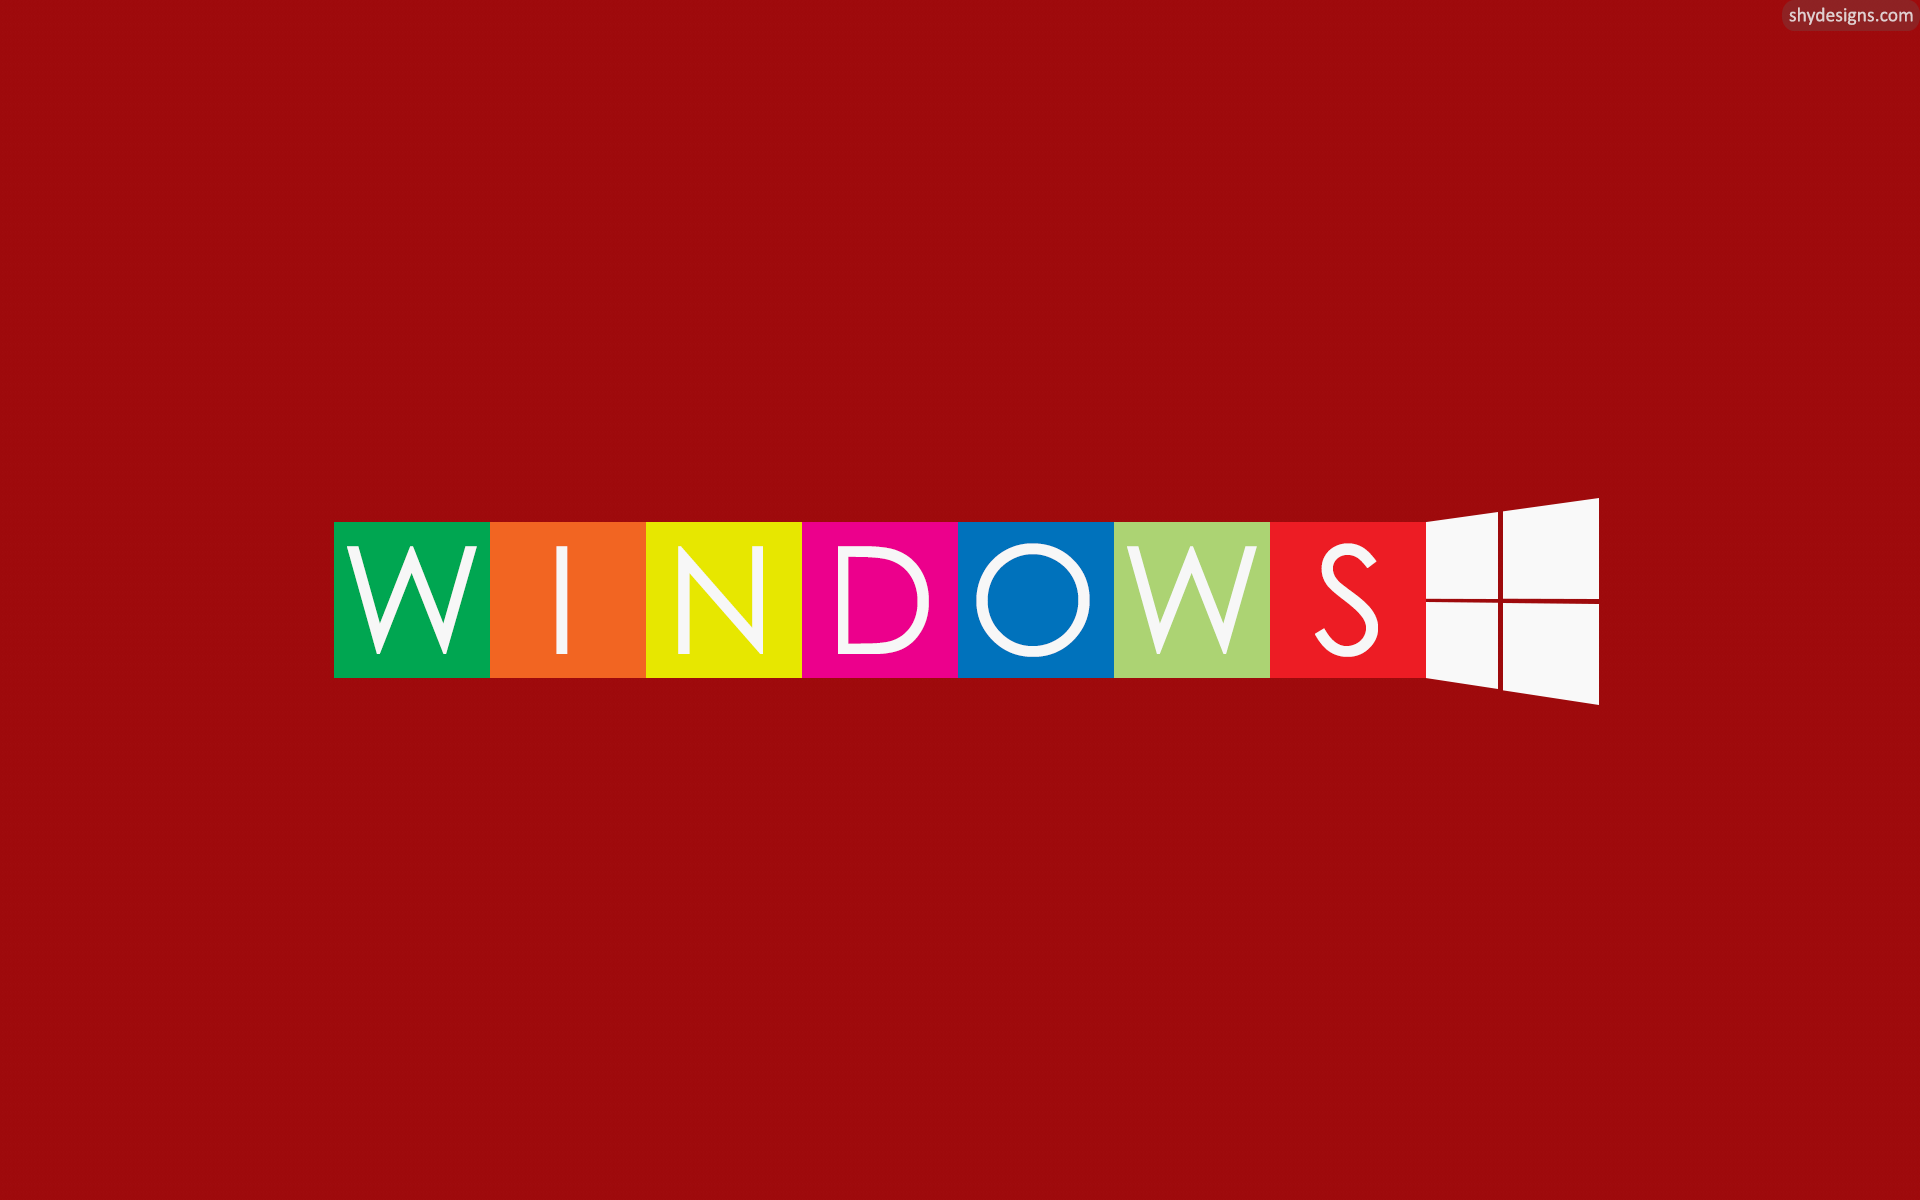 [44+] Wallpapers of Windows 8.1